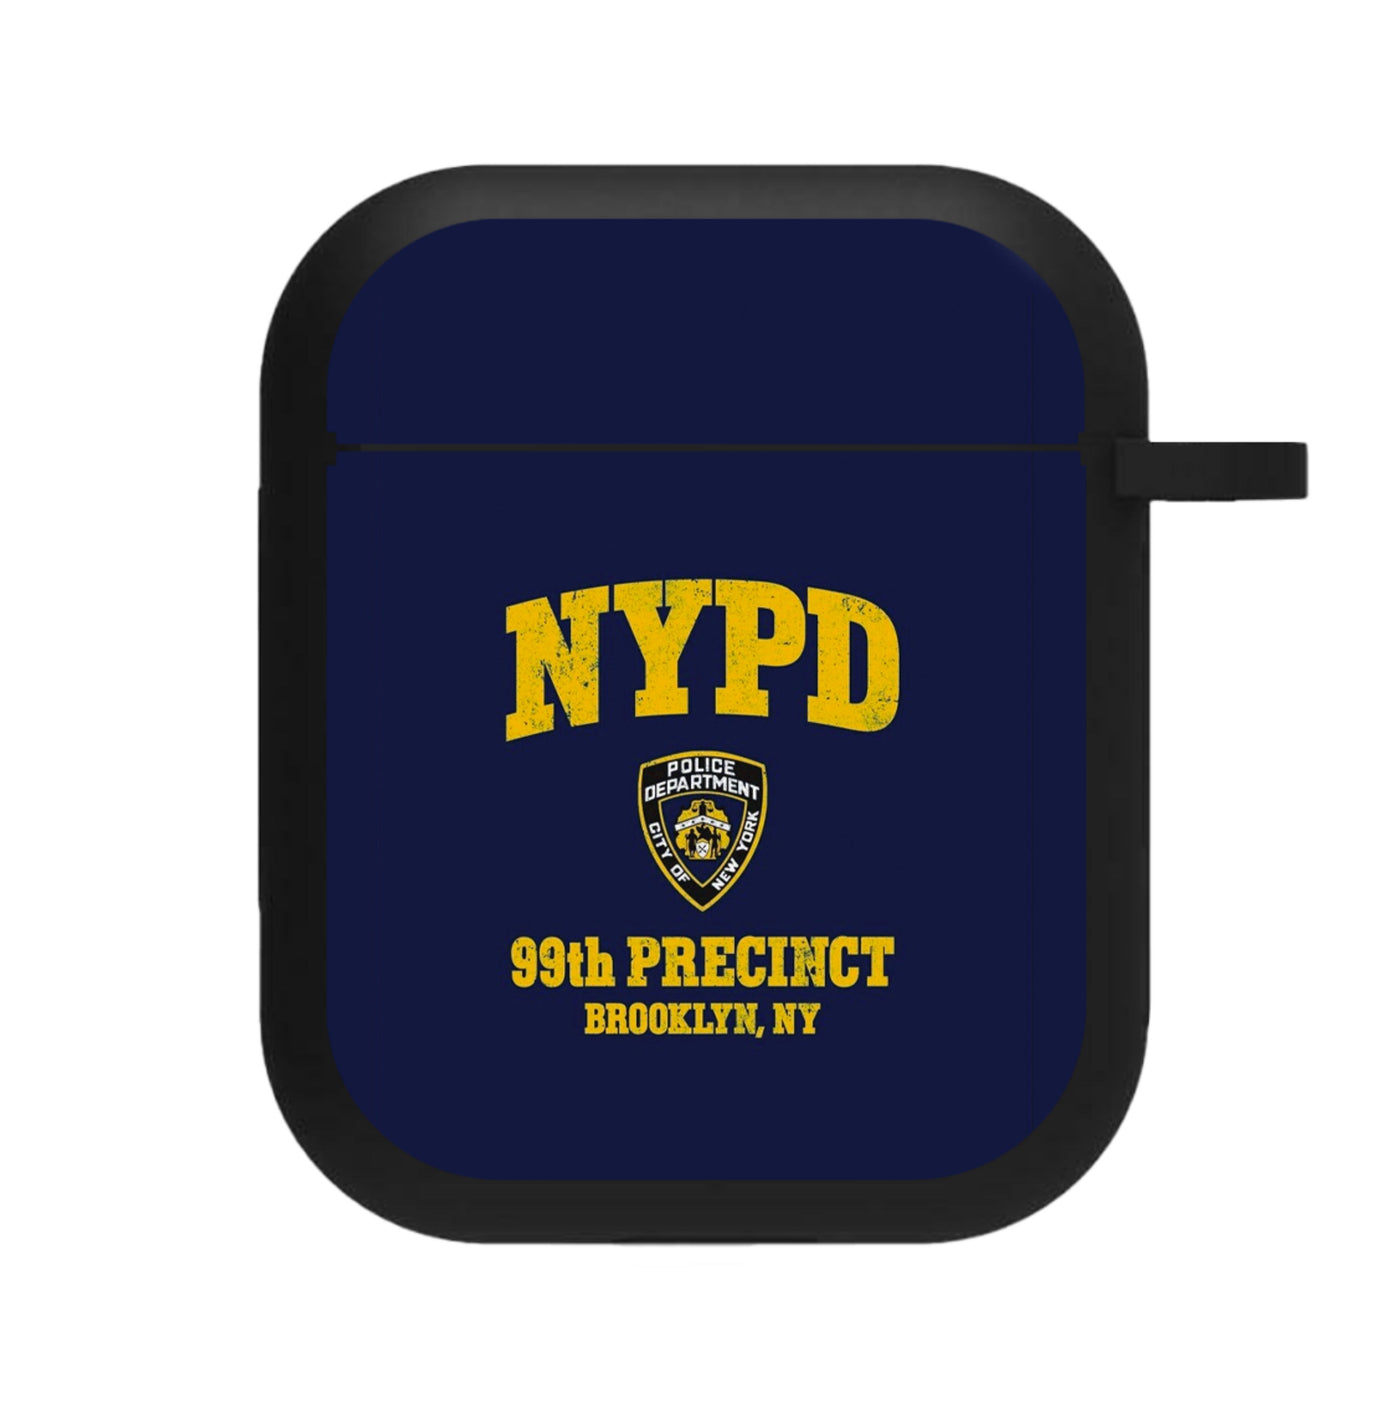 NYPD - Brooklyn Nine-Nine AirPods Case